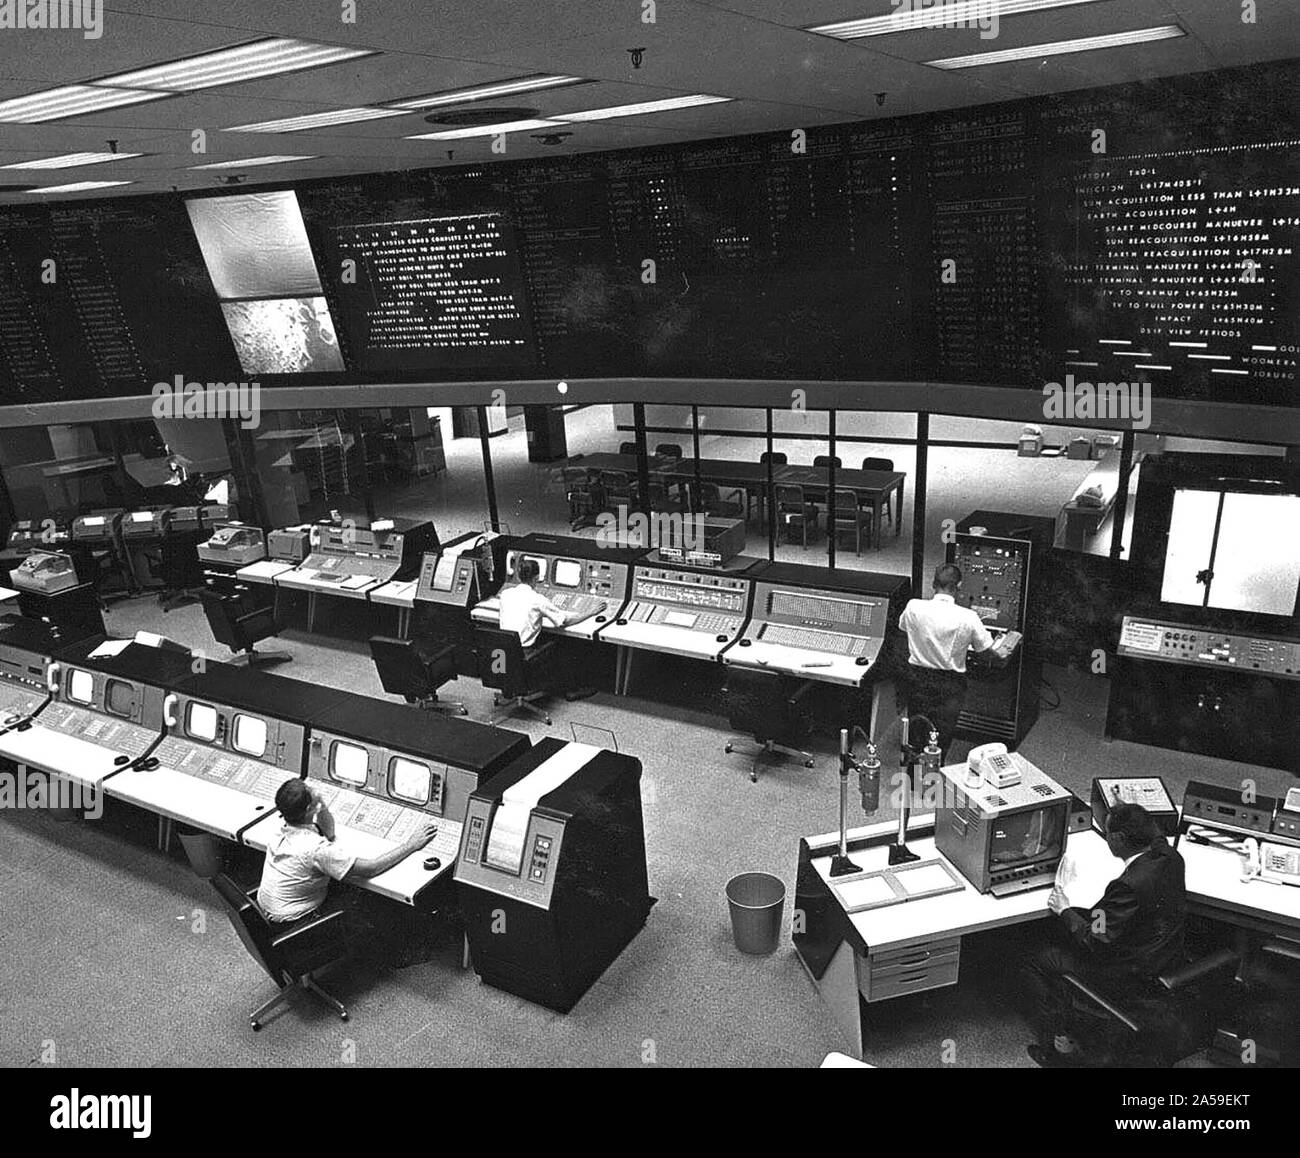 This image was taken in May 1964, when the building this nerve center is in, the Space Flight Operations Facility (Building 230), was dedicated at JPL. Stock Photo